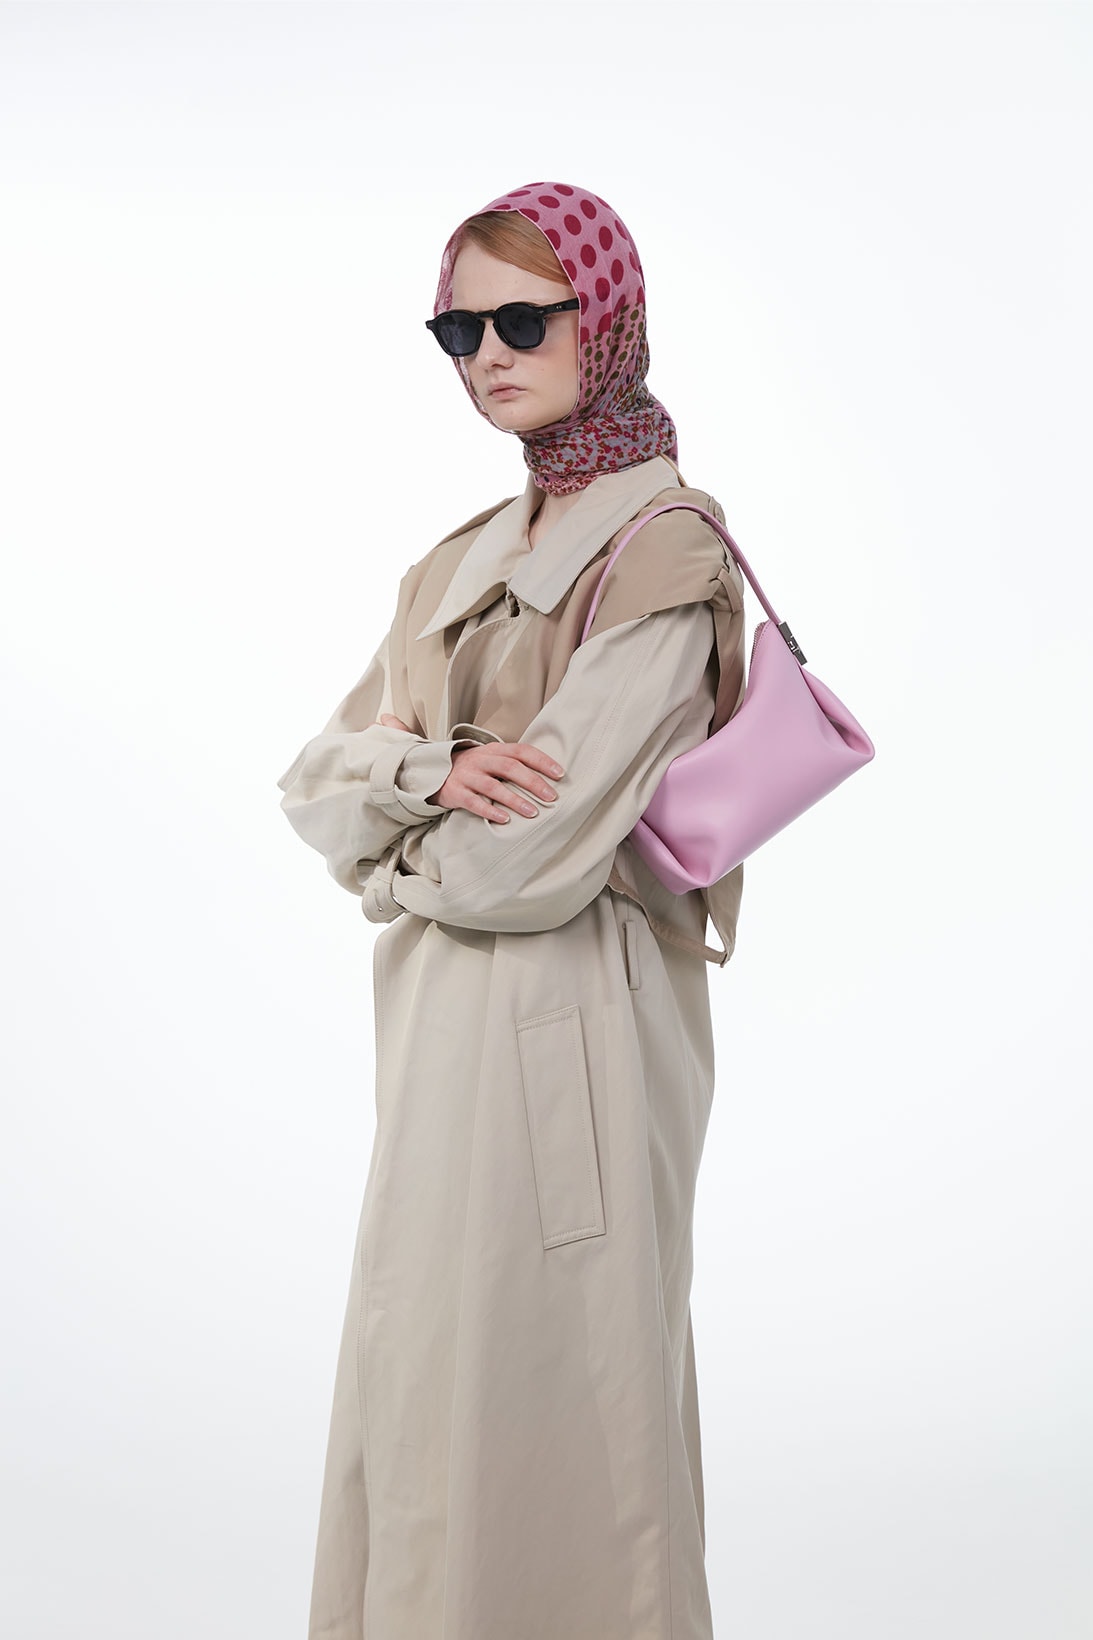 osoi spring summer ss21 collection campaign hustle and bustle handbags coat sunglasses pink